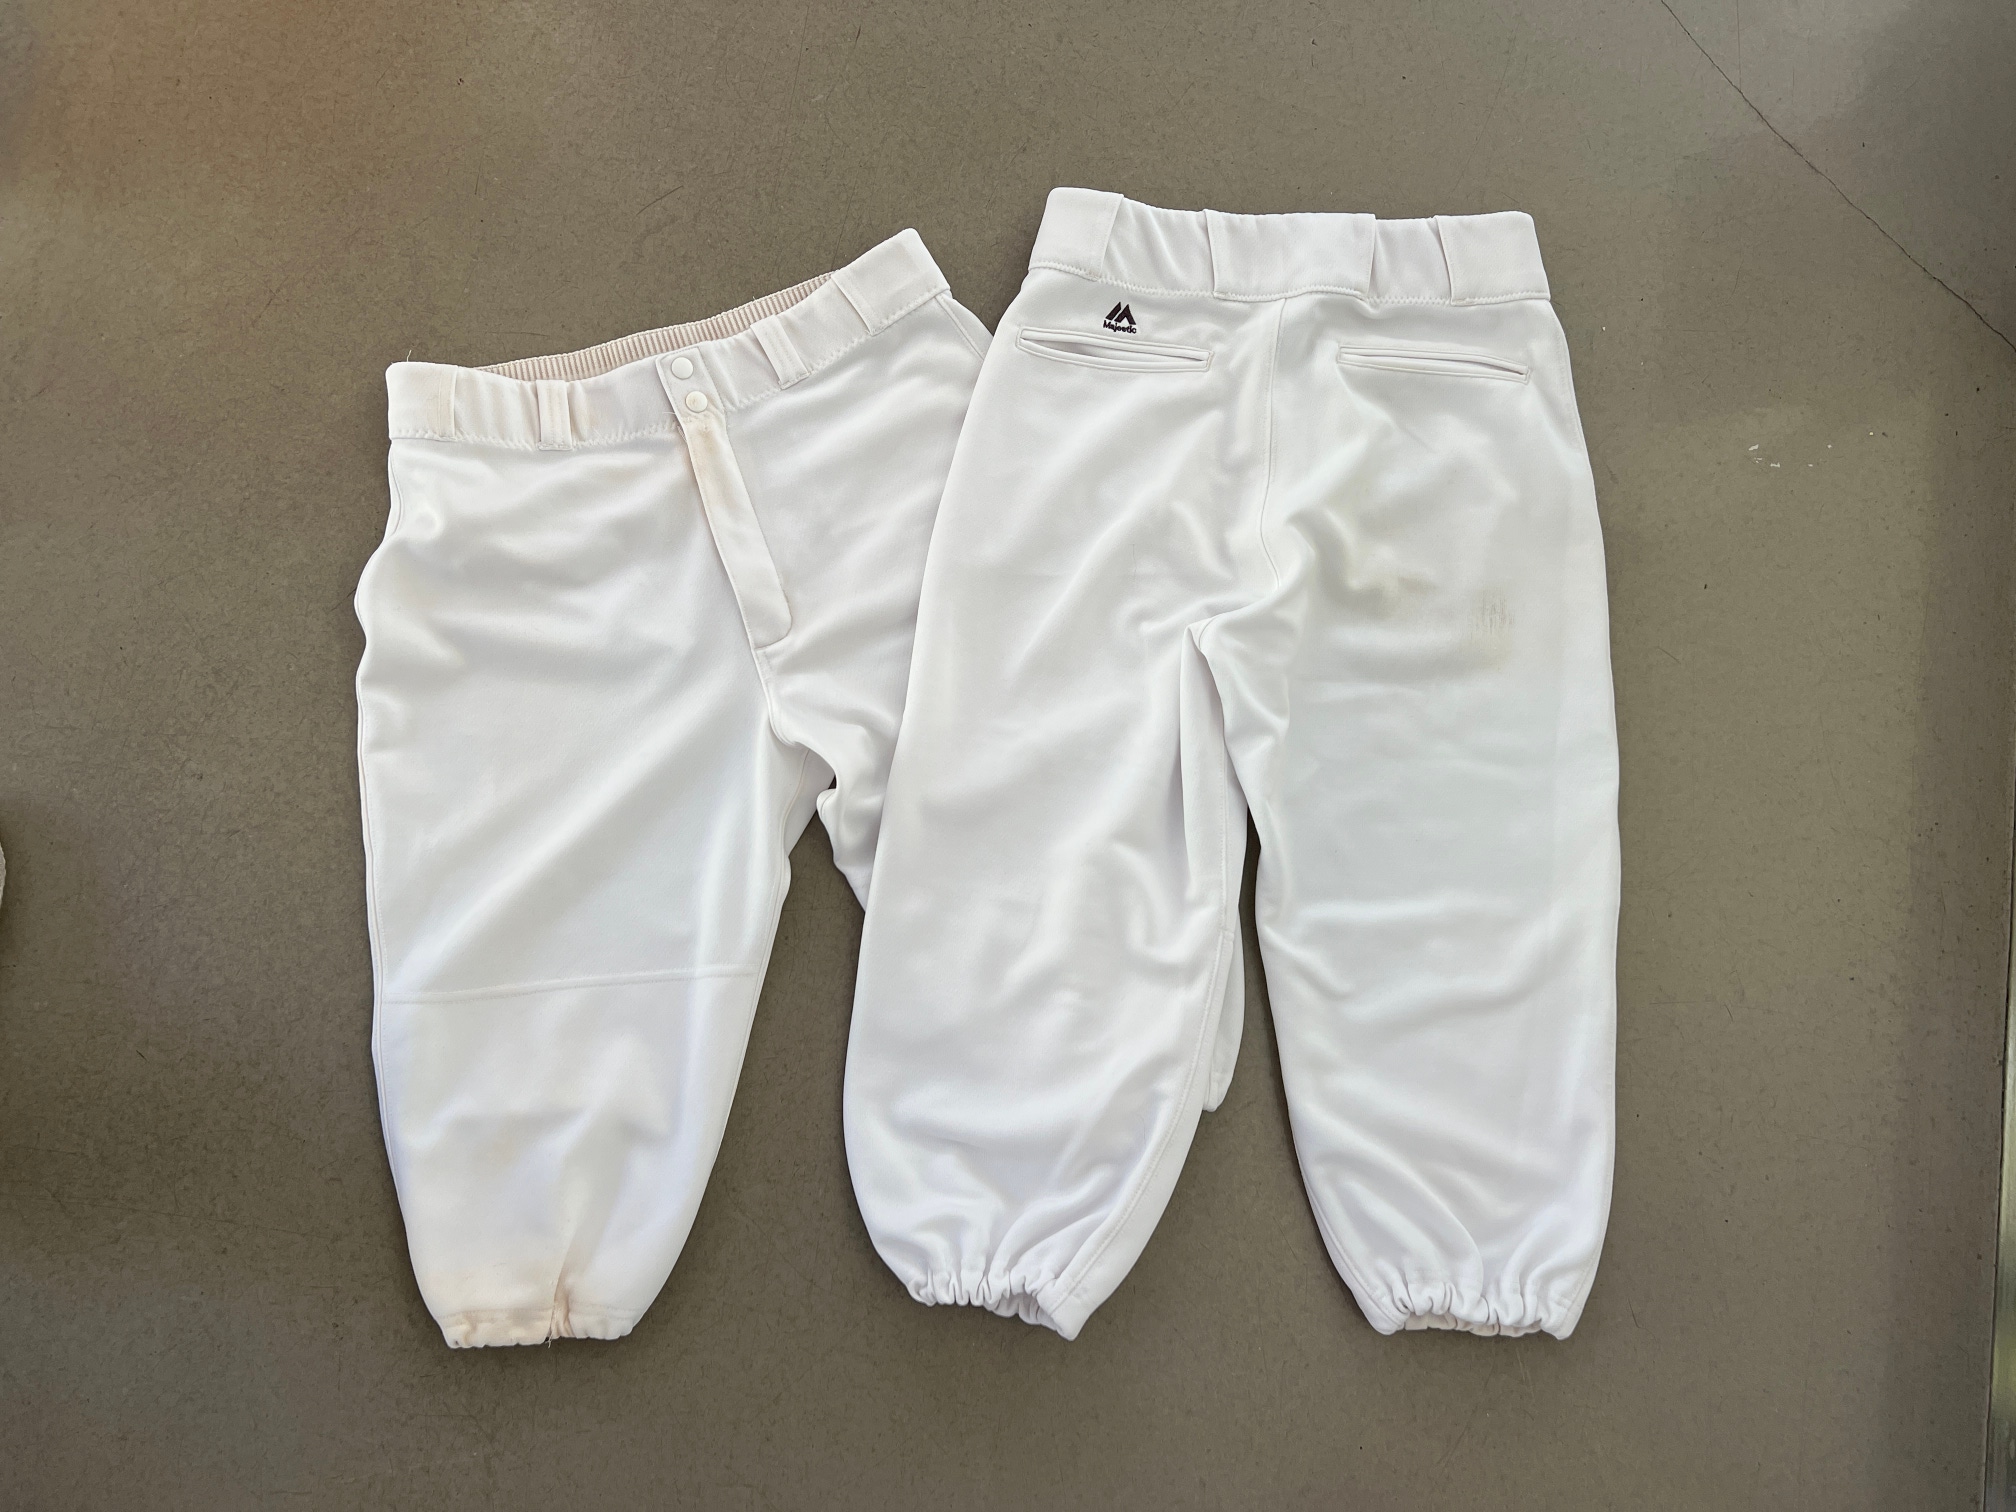 Lot of 2x pairs white baseball pants (Majestic, Adult S and Youth XL)